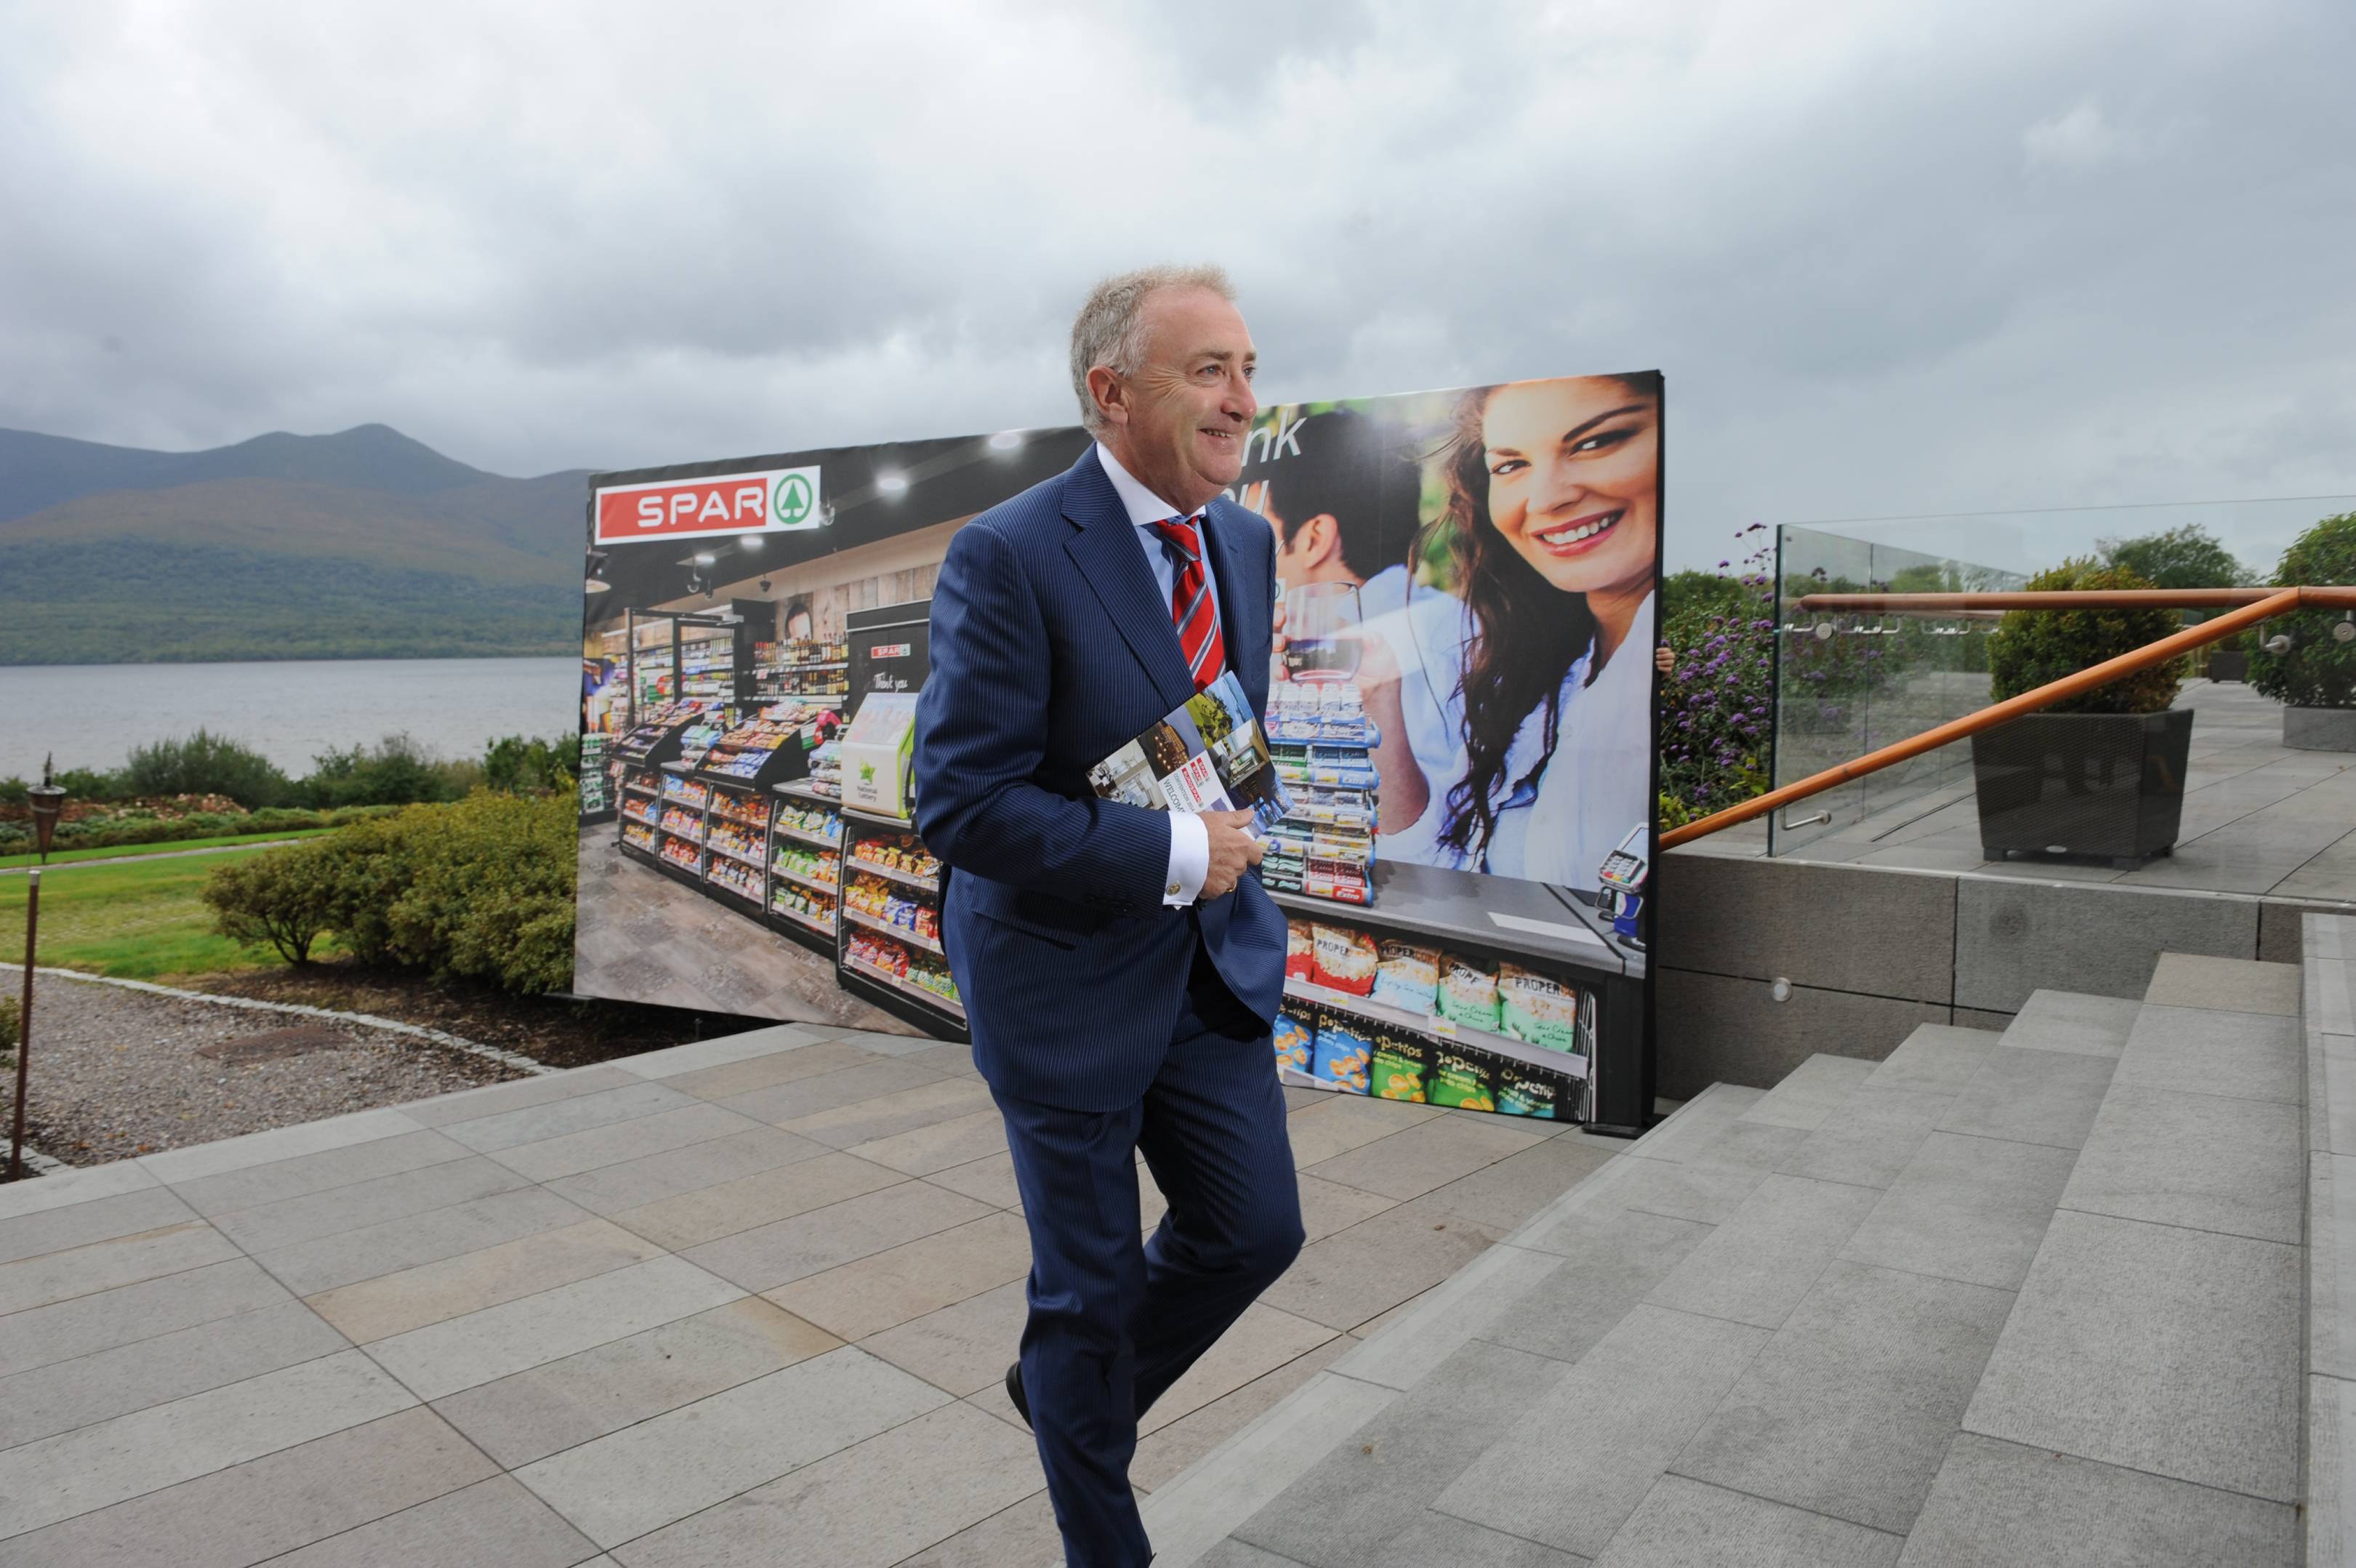 BWG Group CEO, Leo Crawford at the Spar Retailer Convention in Killarney at the weekend